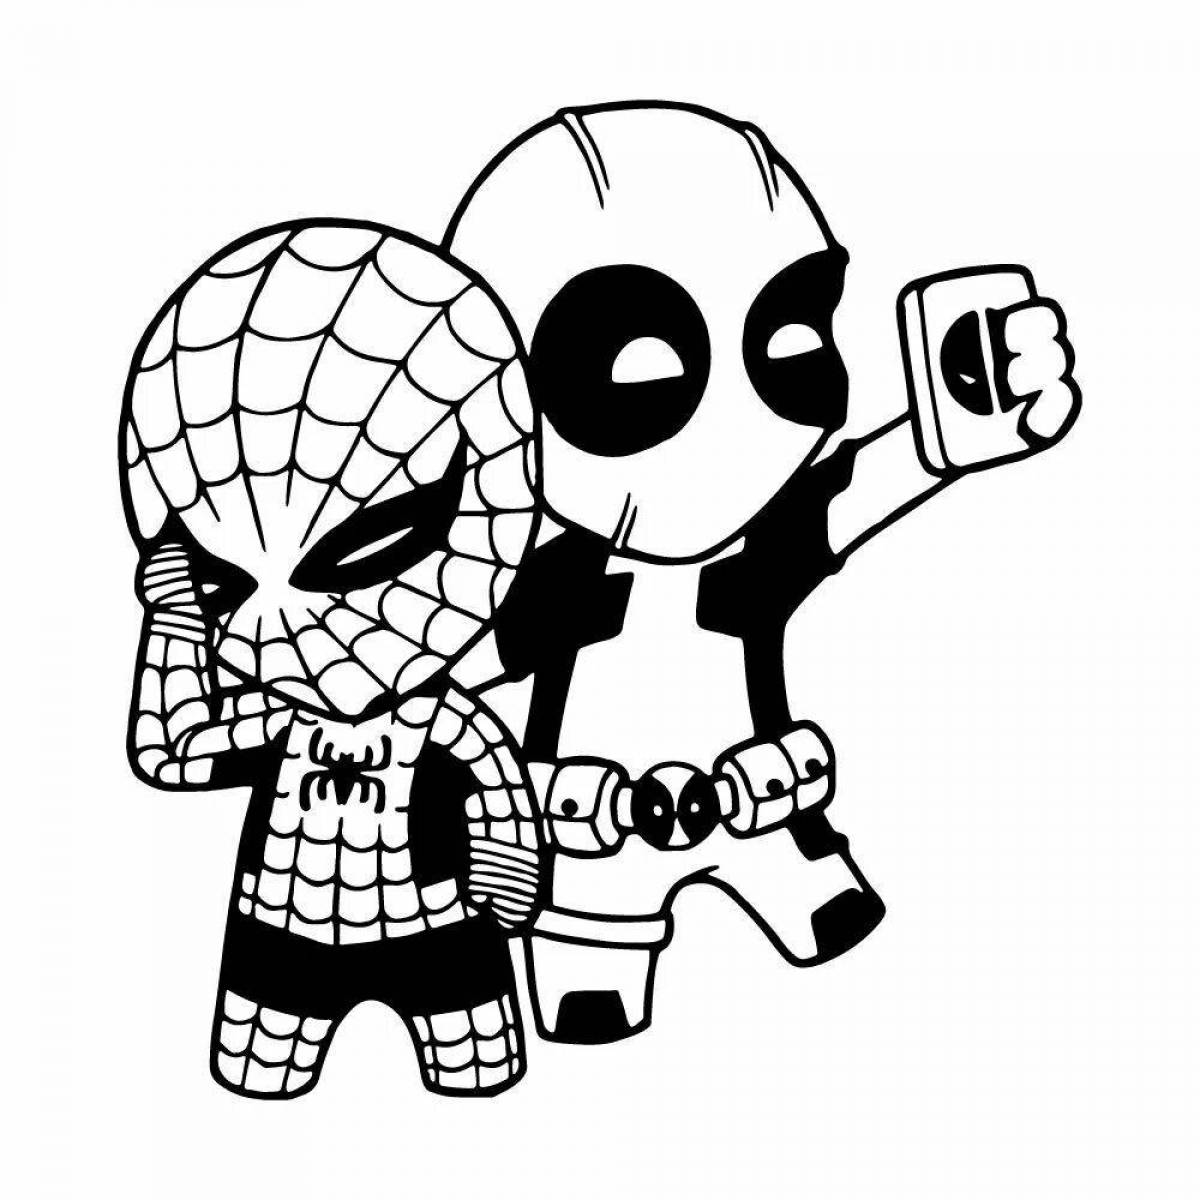 Colorful coloring pages of deadpool and spiderman for kids